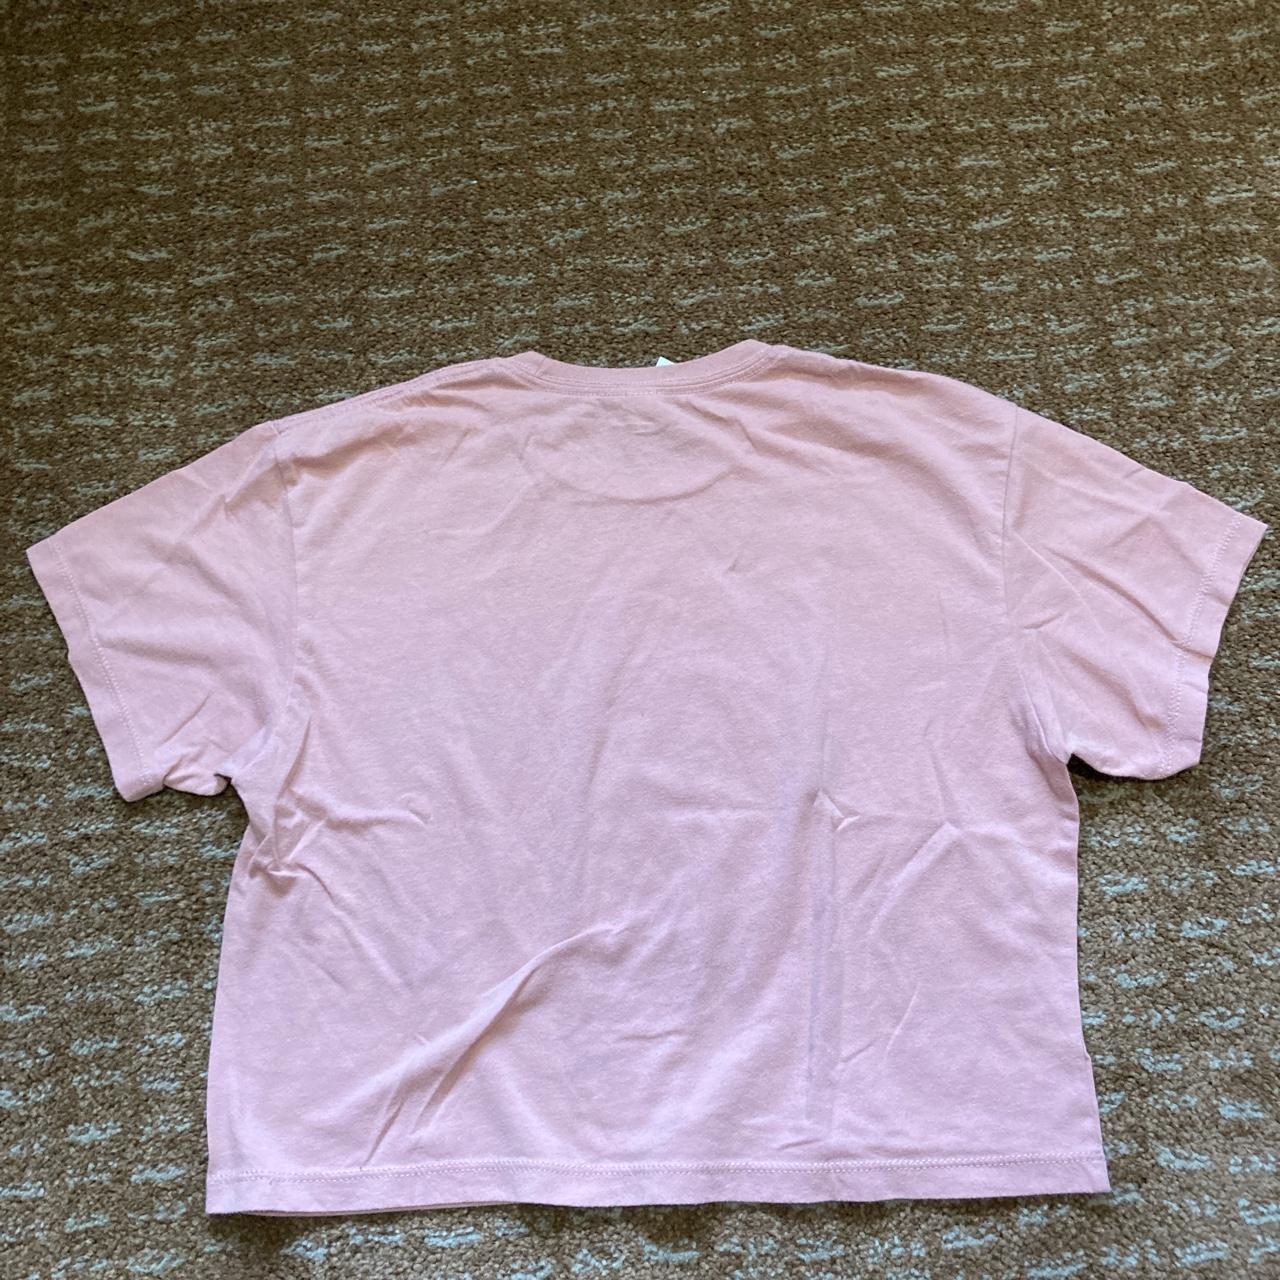 Charli XCX bout to crash cropped t shirt Got this... - Depop